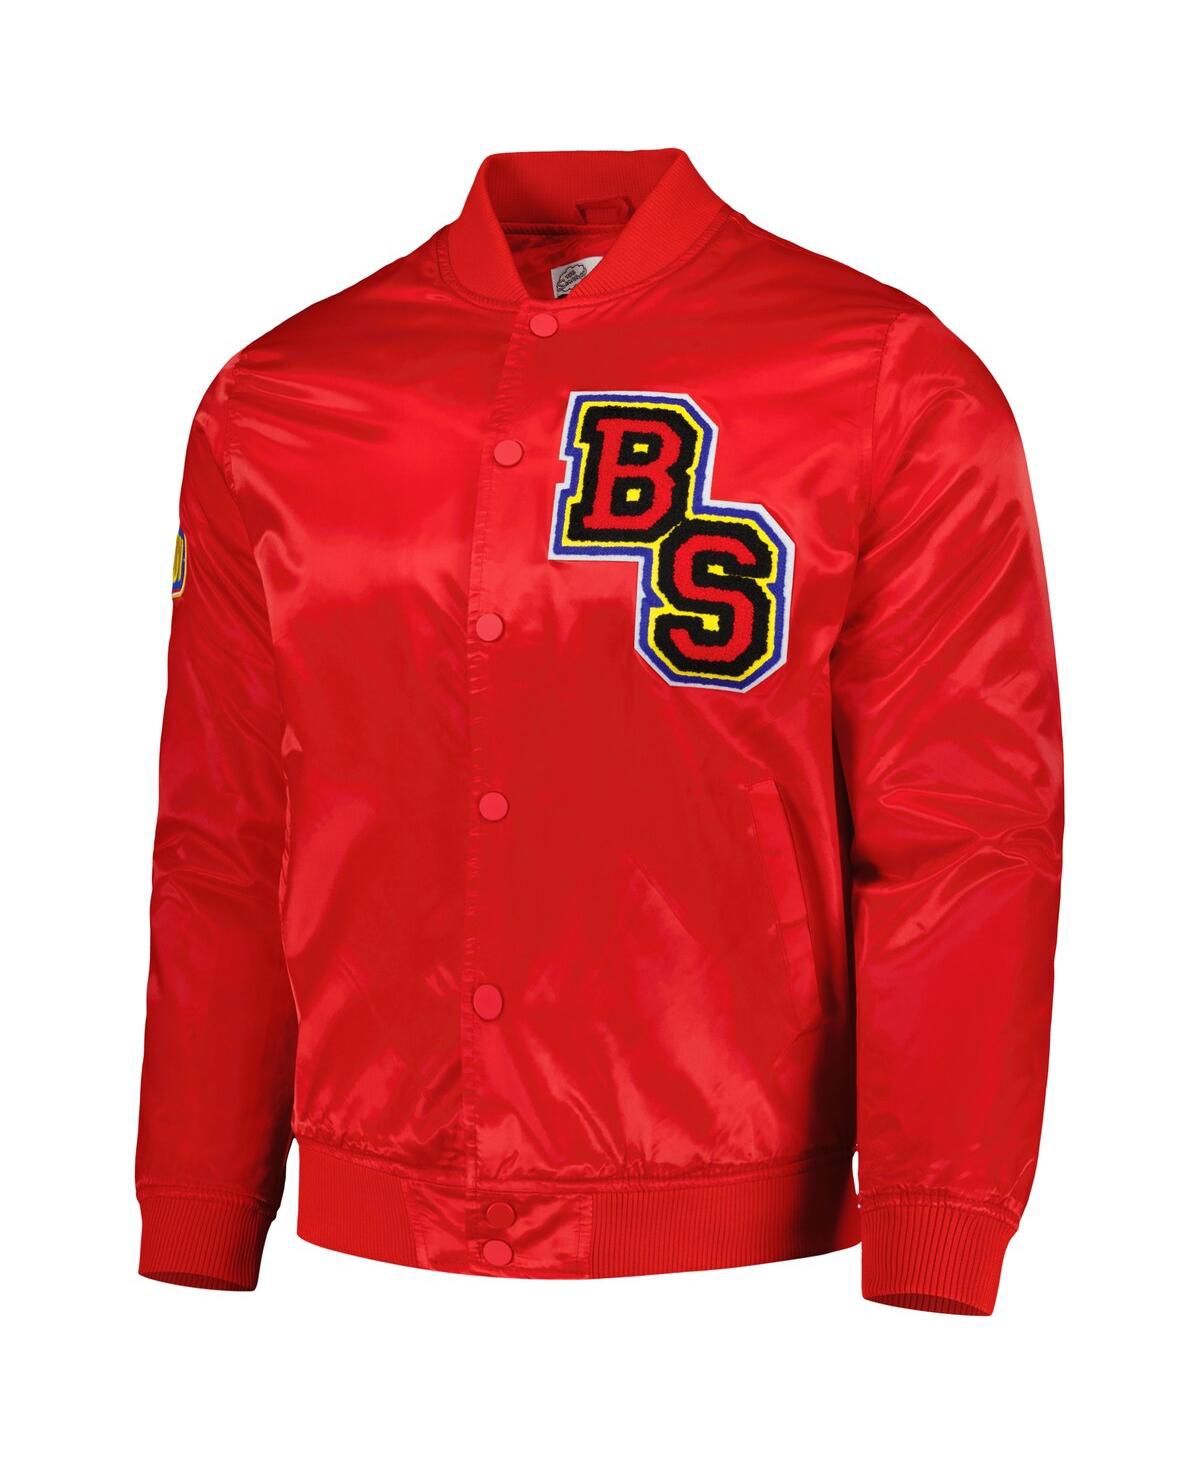 Shop Freeze Max Men's  Red The Simpsons Bart Simpson Satin Full-snap Jacket